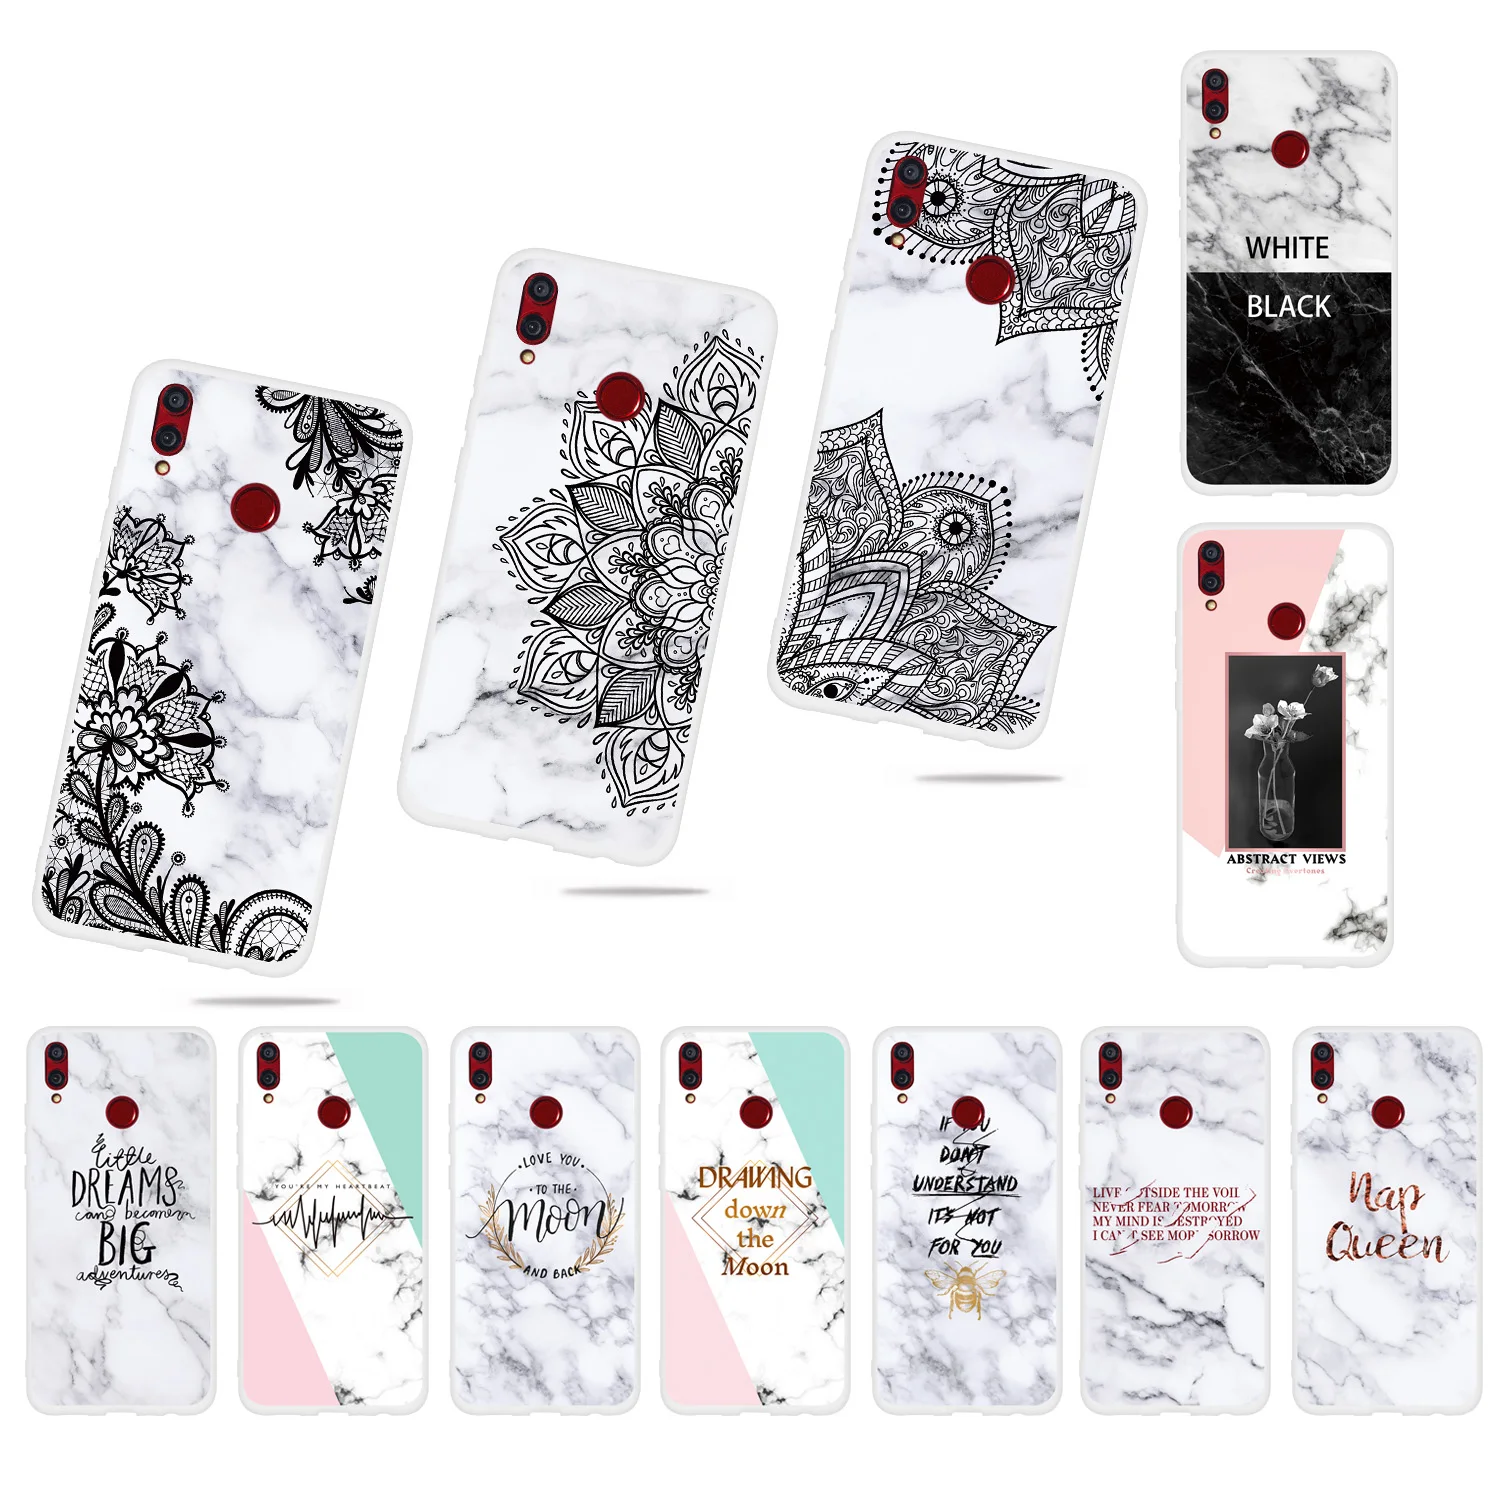 

Marble Clear Cases For Huawei Honor 8X 7A Pro 7C 7S 7X 10 Honor 8 Pro V9 8 Lite 9 P Smart Plus 2019 Covers Silicone Housings